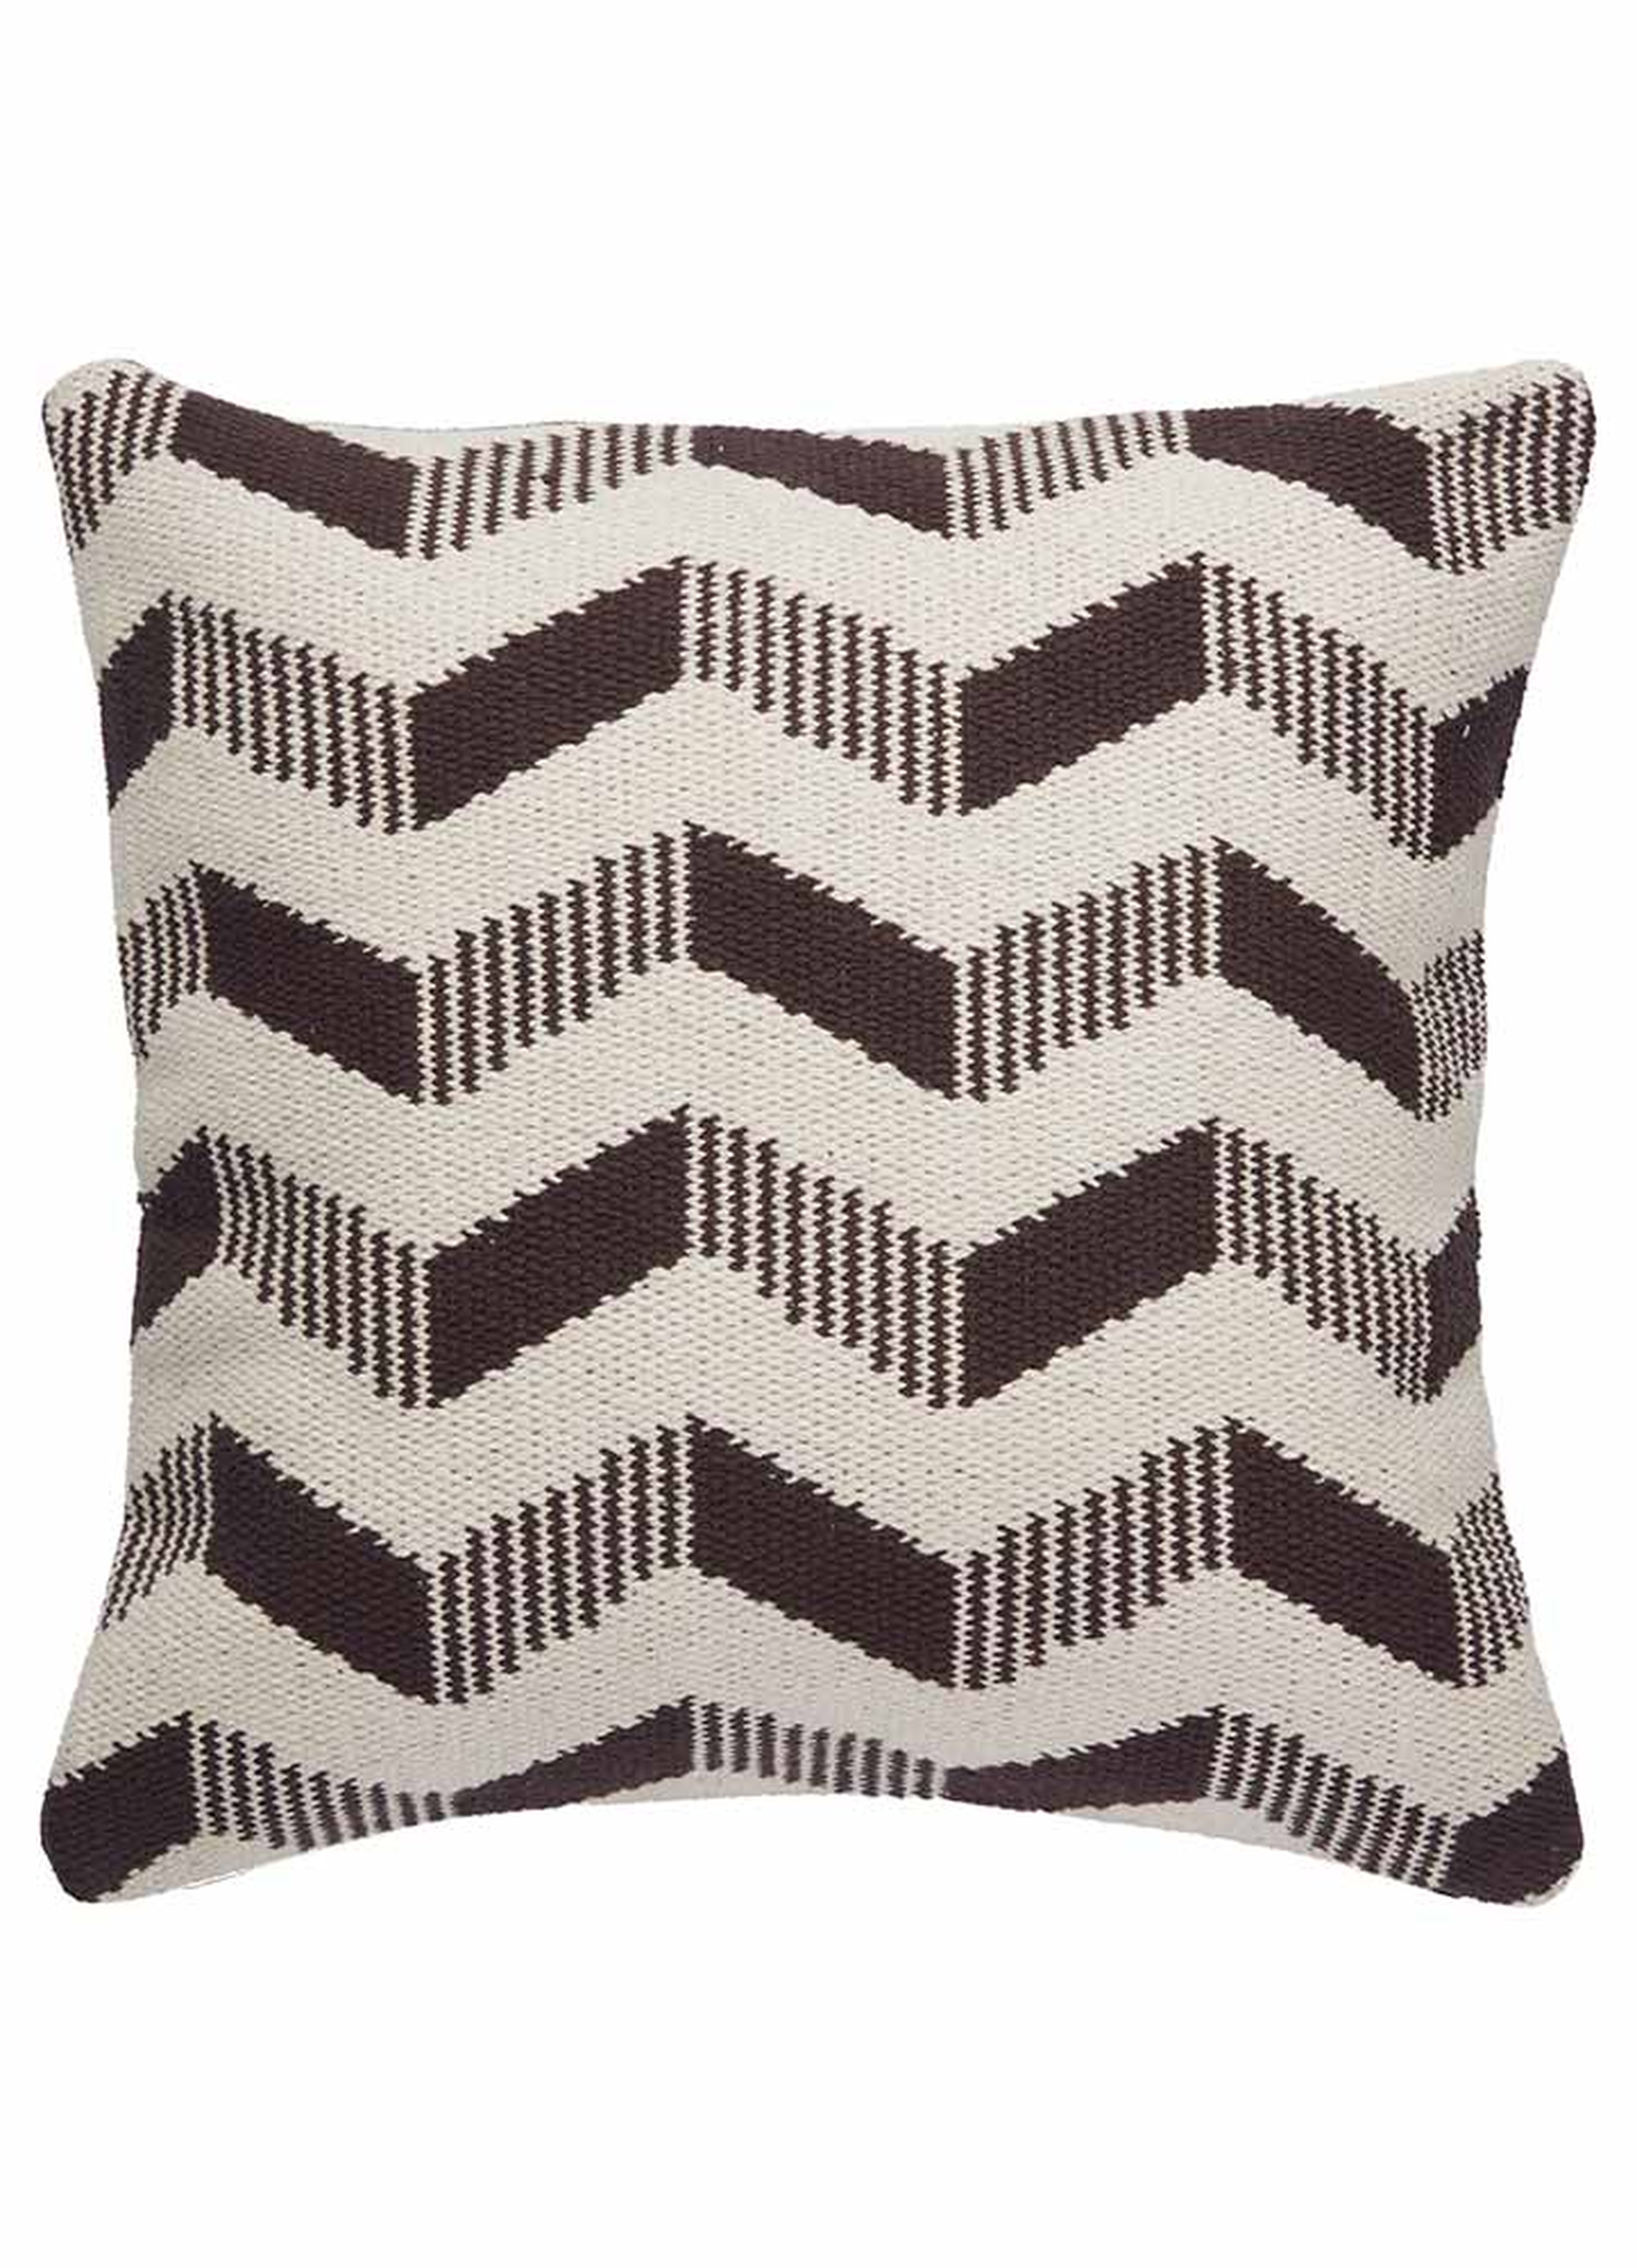 NGP47 - National Geographic Home Collection Pillow - 20" x 20" - Poly fill - Collective Weavers